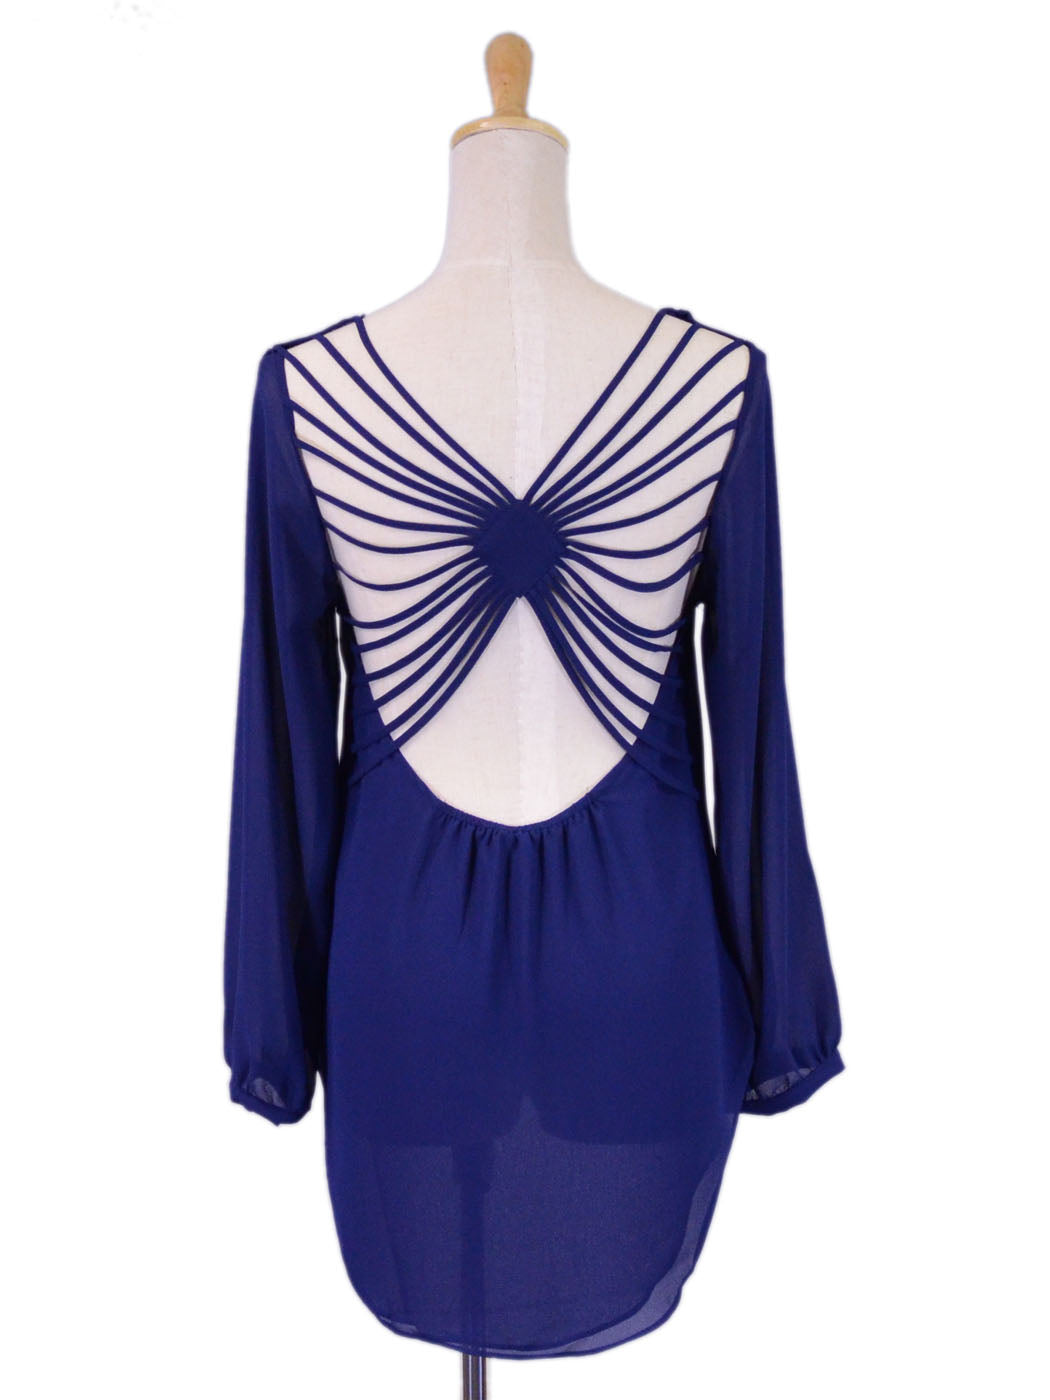 Naked Zebra Navy Blue Long Sleeved Blouse With Cutout Back And Gathered Strings - ALILANG.COM